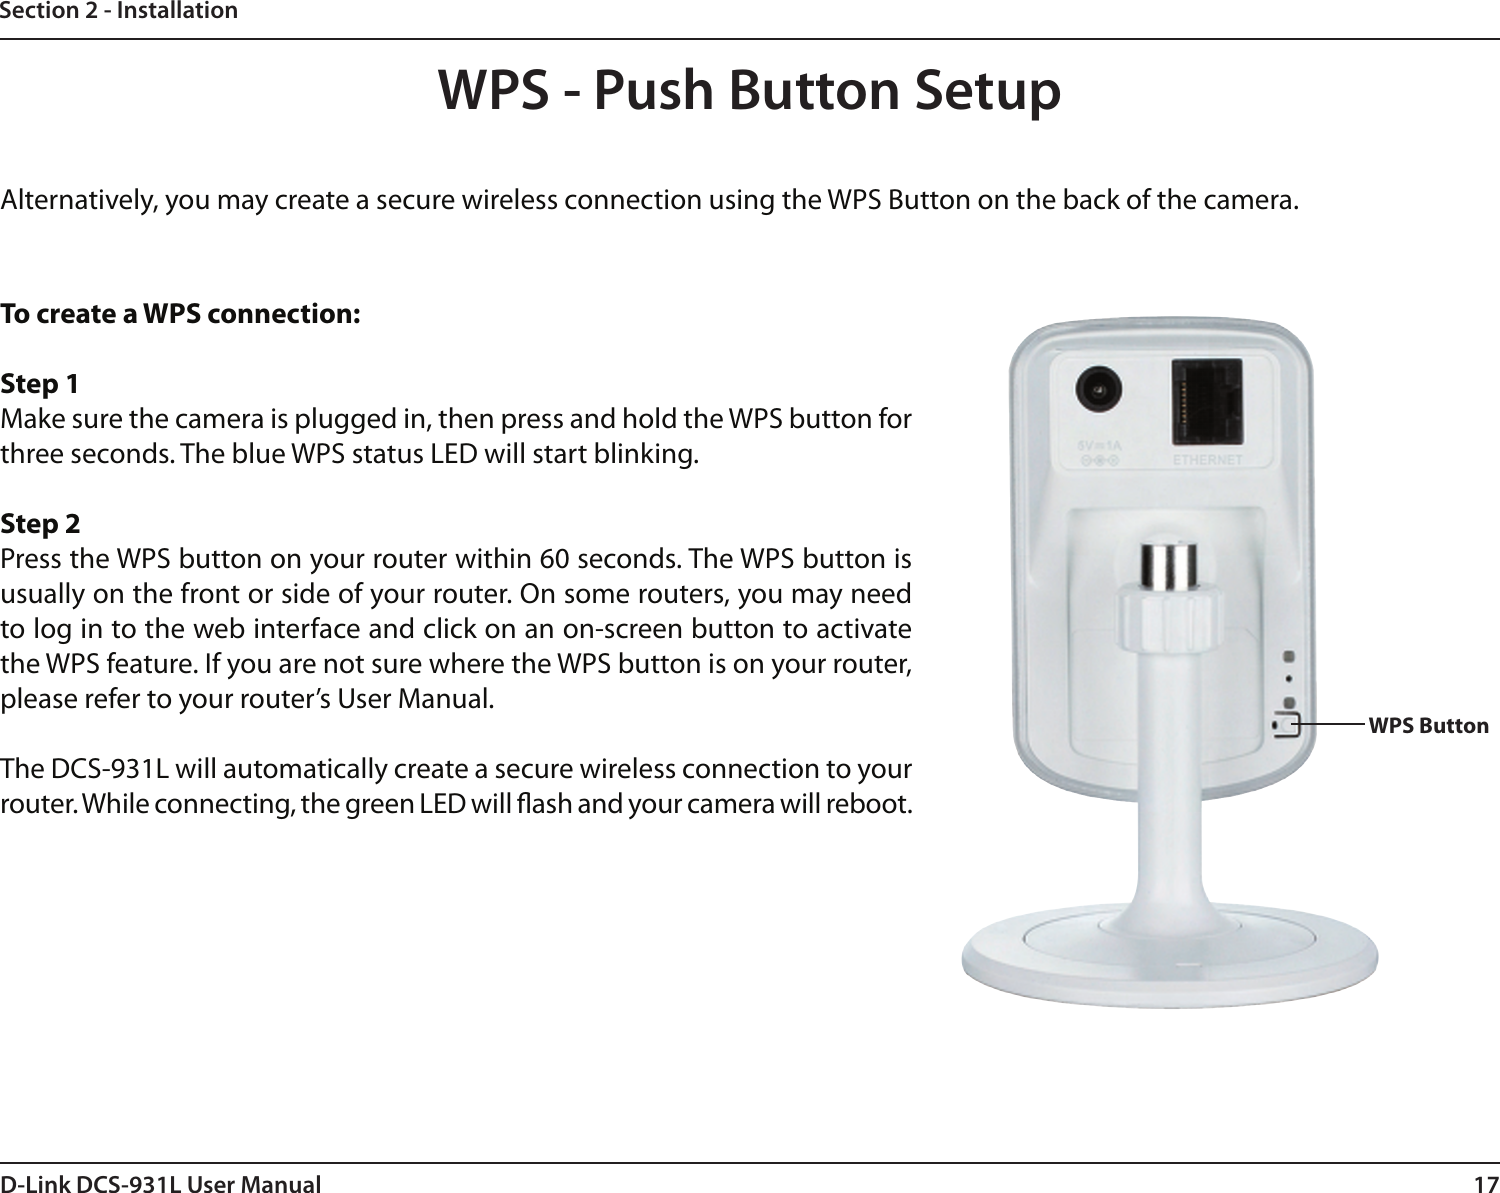 17D-Link DCS-931L User ManualSection 2 - InstallationTo create a WPS connection:Step 1Make sure the camera is plugged in, then press and hold the WPS button for three seconds. The blue WPS status LED will start blinking.Step 2Press the WPS button on your router within 60 seconds. The WPS button is usually on the front or side of your router. On some routers, you may need to log in to the web interface and click on an on-screen button to activate the WPS feature. If you are not sure where the WPS button is on your router, please refer to your router’s User Manual.The DCS-931L will automatically create a secure wireless connection to your router. While connecting, the green LED will ash and your camera will reboot.WPS - Push Button SetupWPS ButtonAlternatively, you may create a secure wireless connection using the WPS Button on the back of the camera.